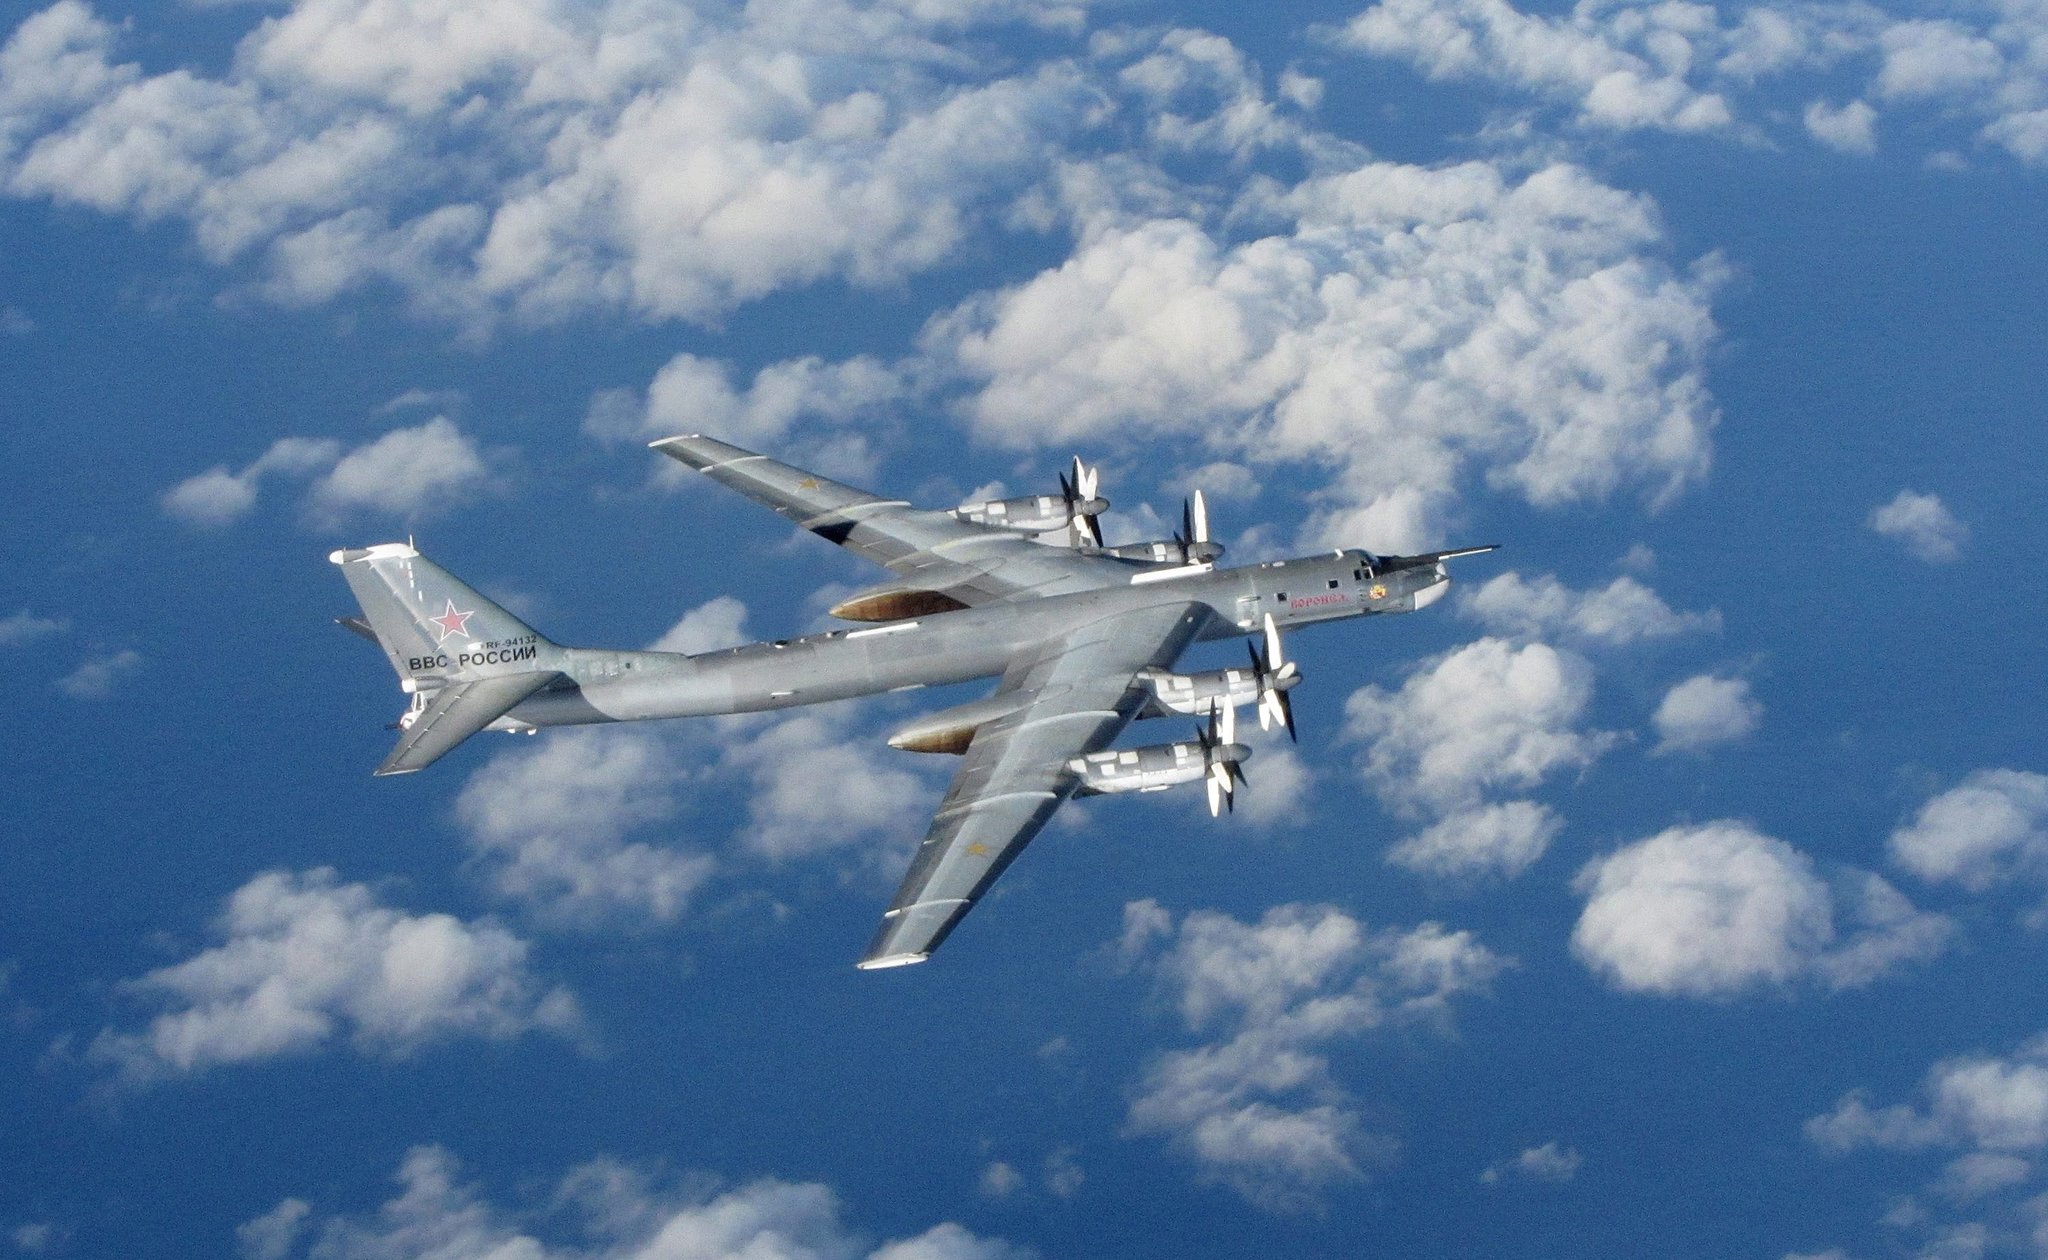 a-russian-tu-95-bomber-photographed-from-a-royal-air-force-plane-off-the-coast-of-britain-in-october-2014.jpg